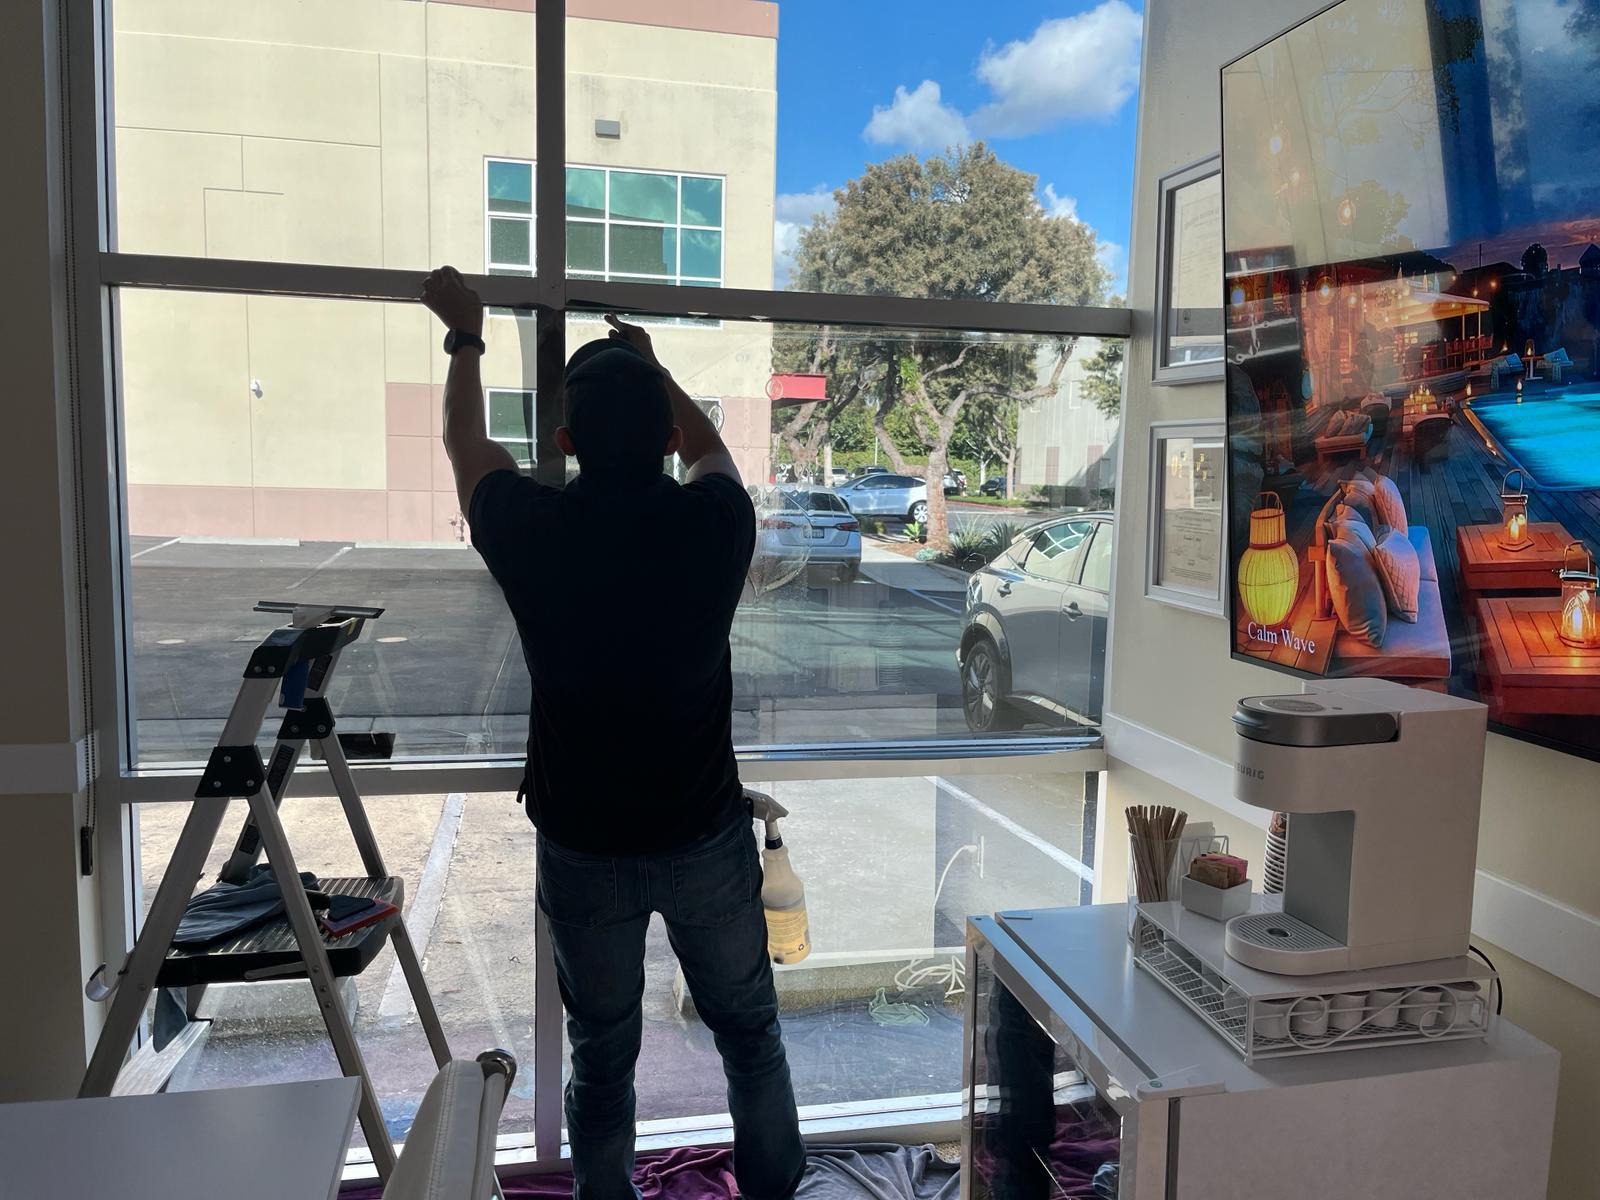 Commercial Window Tinting in Los Angeles